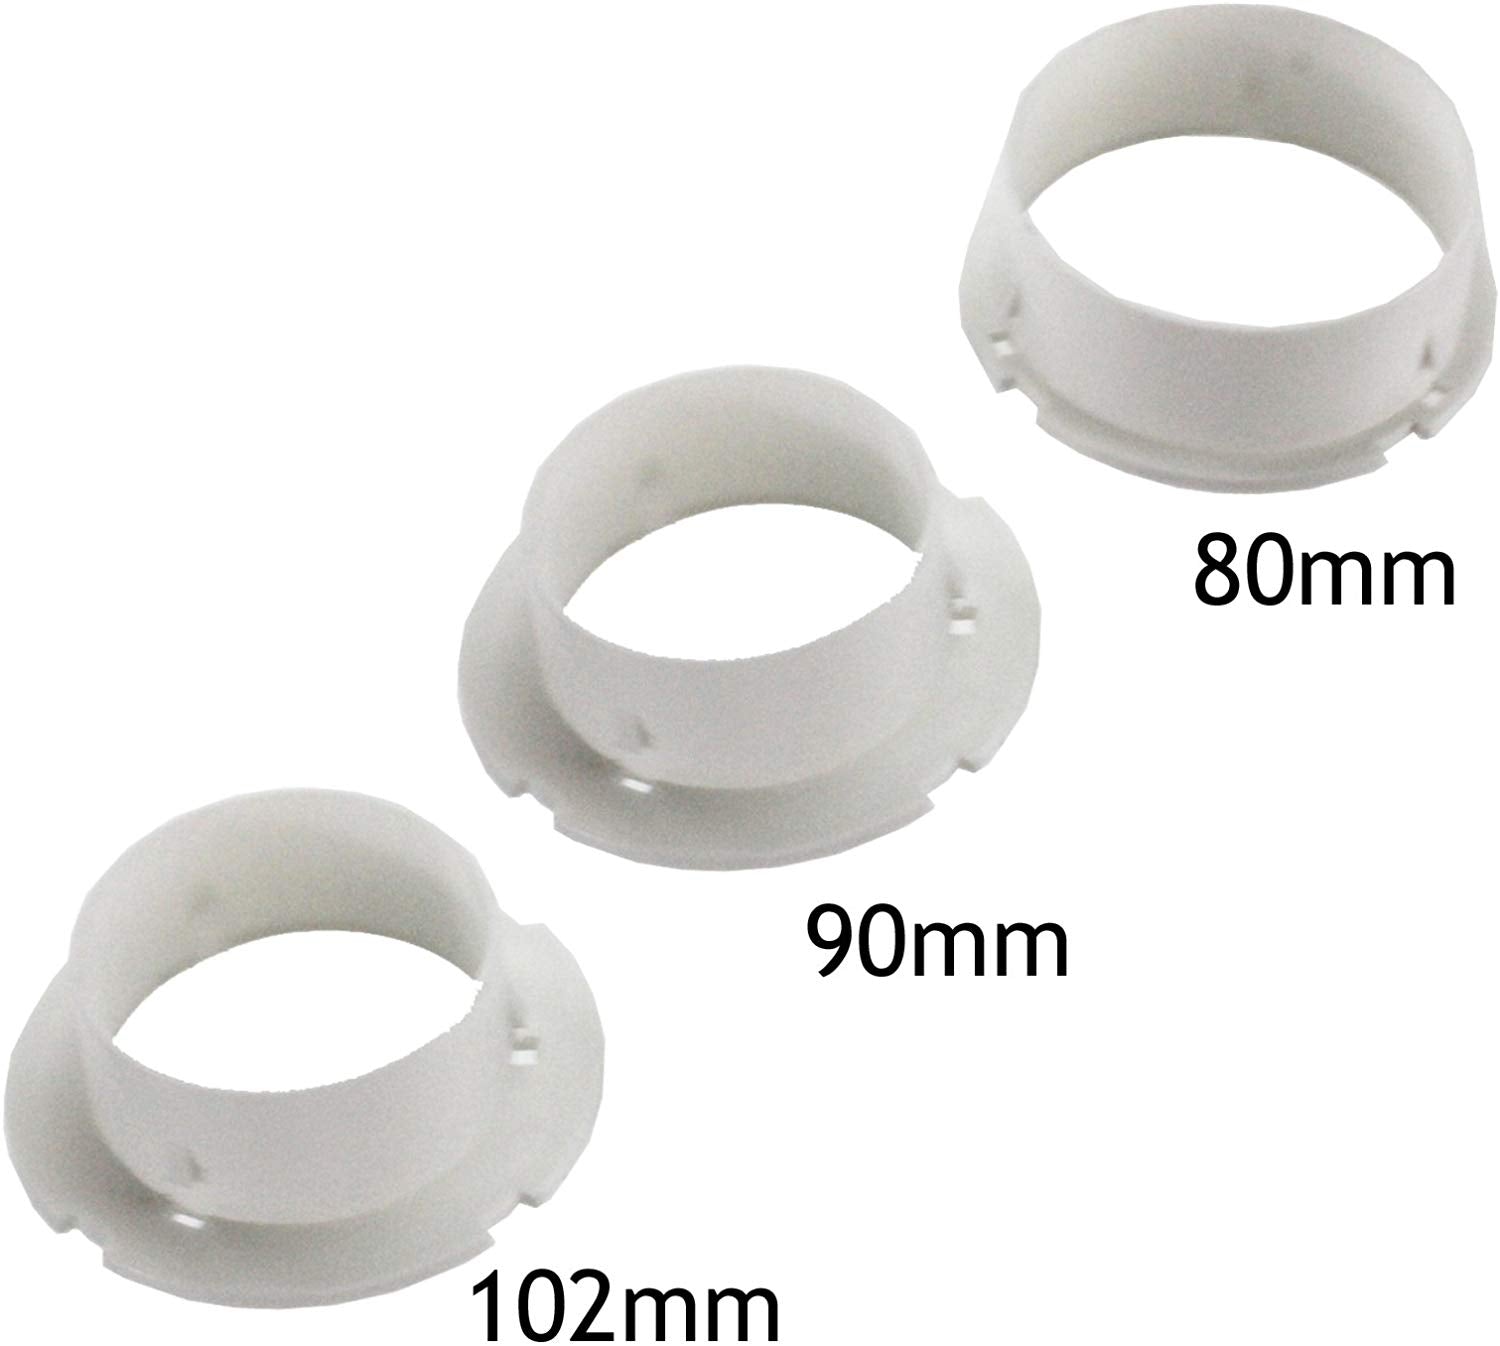 Vent Hose Condenser Kit with 3 x Adapters for Neff Tumble Dryer (1.2m)